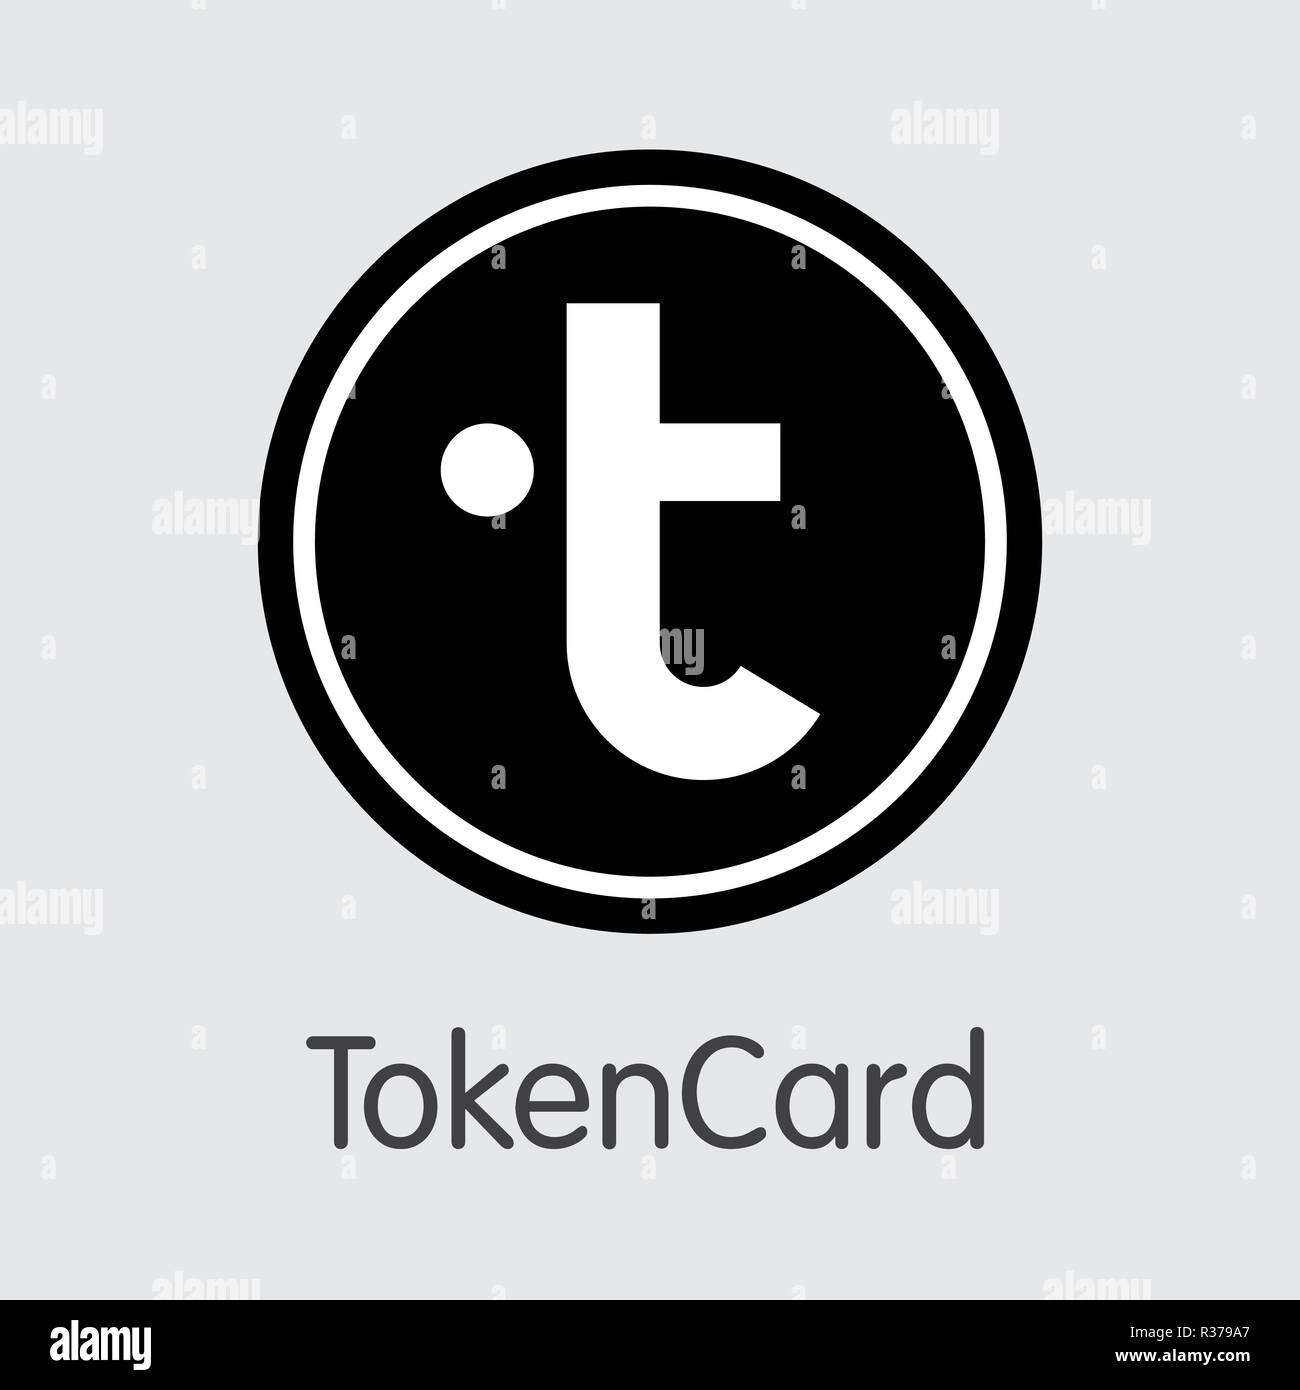 Tokencard - Digital Coin Vector Icon of Cryptographic Currency. Stock Vector